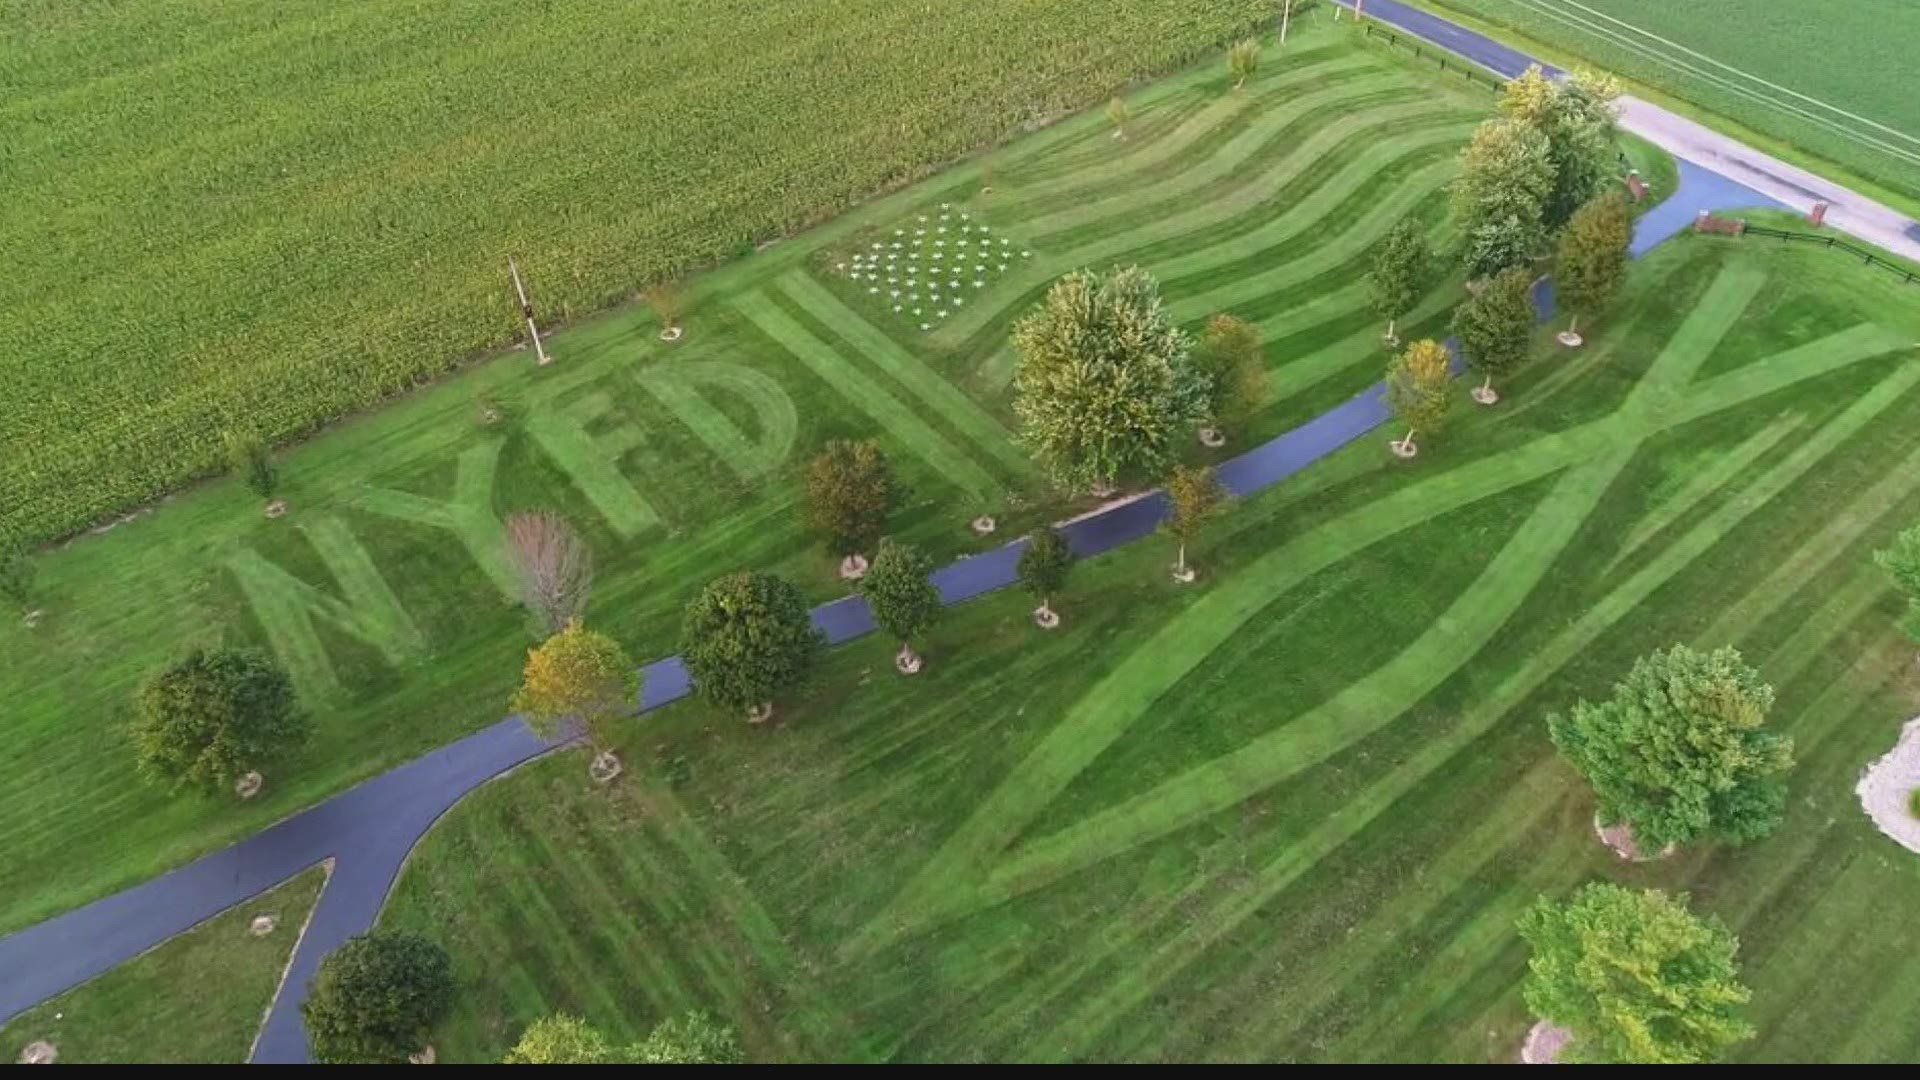 A Greenwood man added another tribute to his lawn.